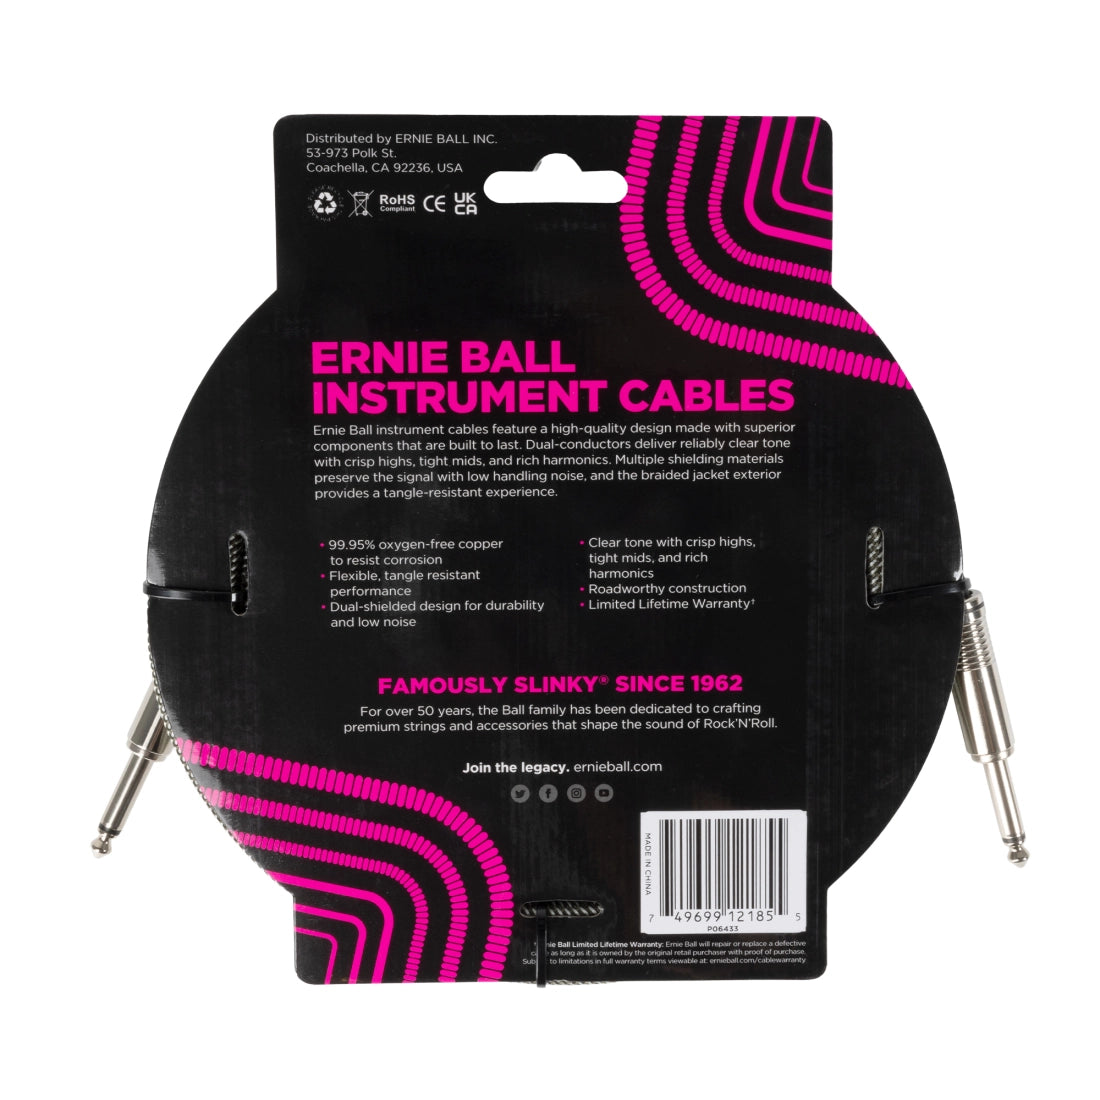 Ernie Ball 18ft Braided Instrument Cable - Silver Fox - Joondalup Music Centre